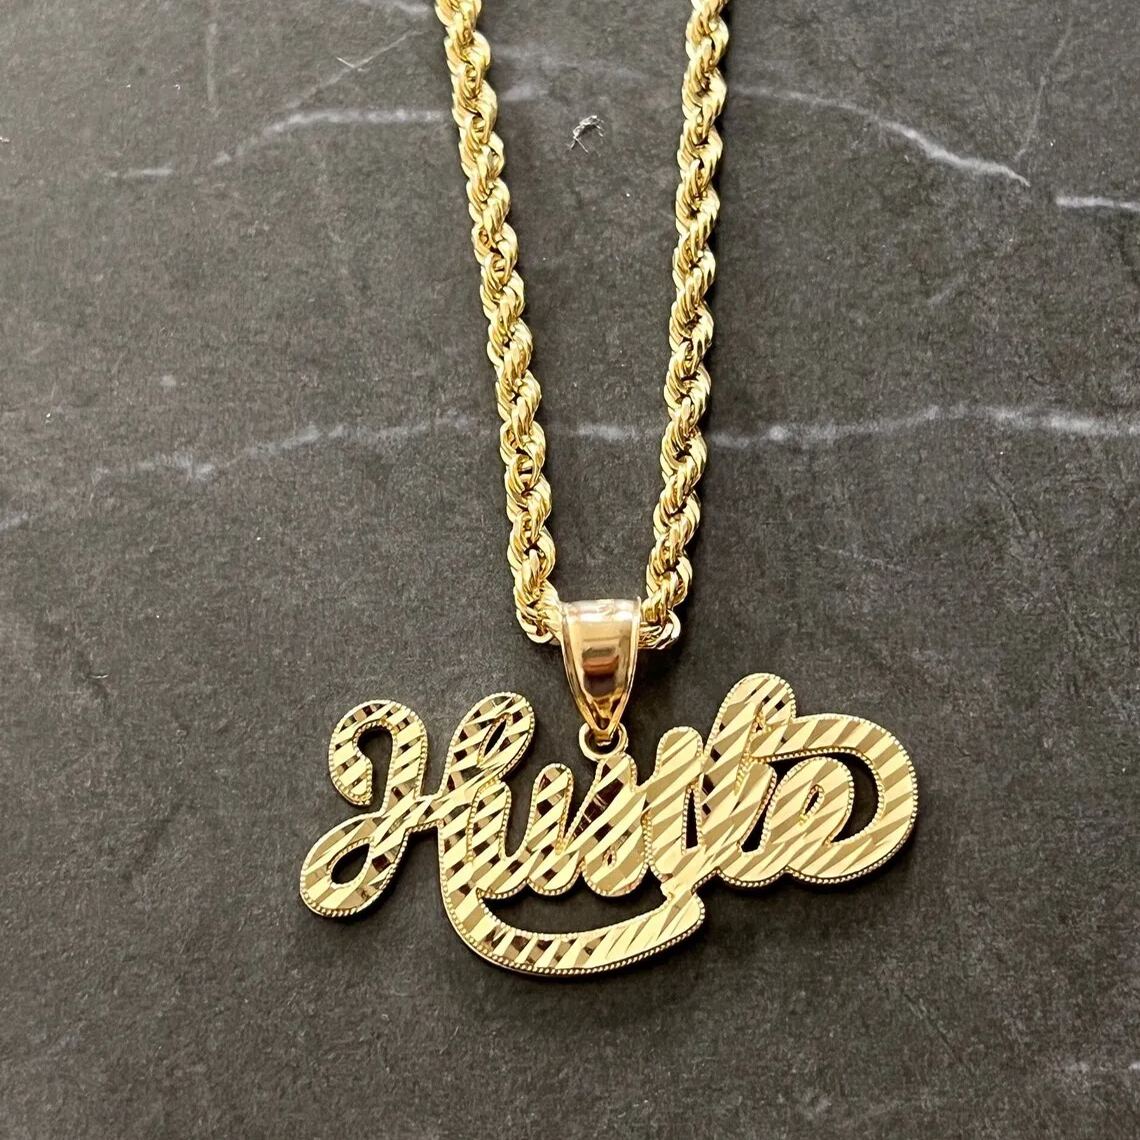 [Copy]Diamond Cut Gold Plated Rope Chain Custom Name Necklace